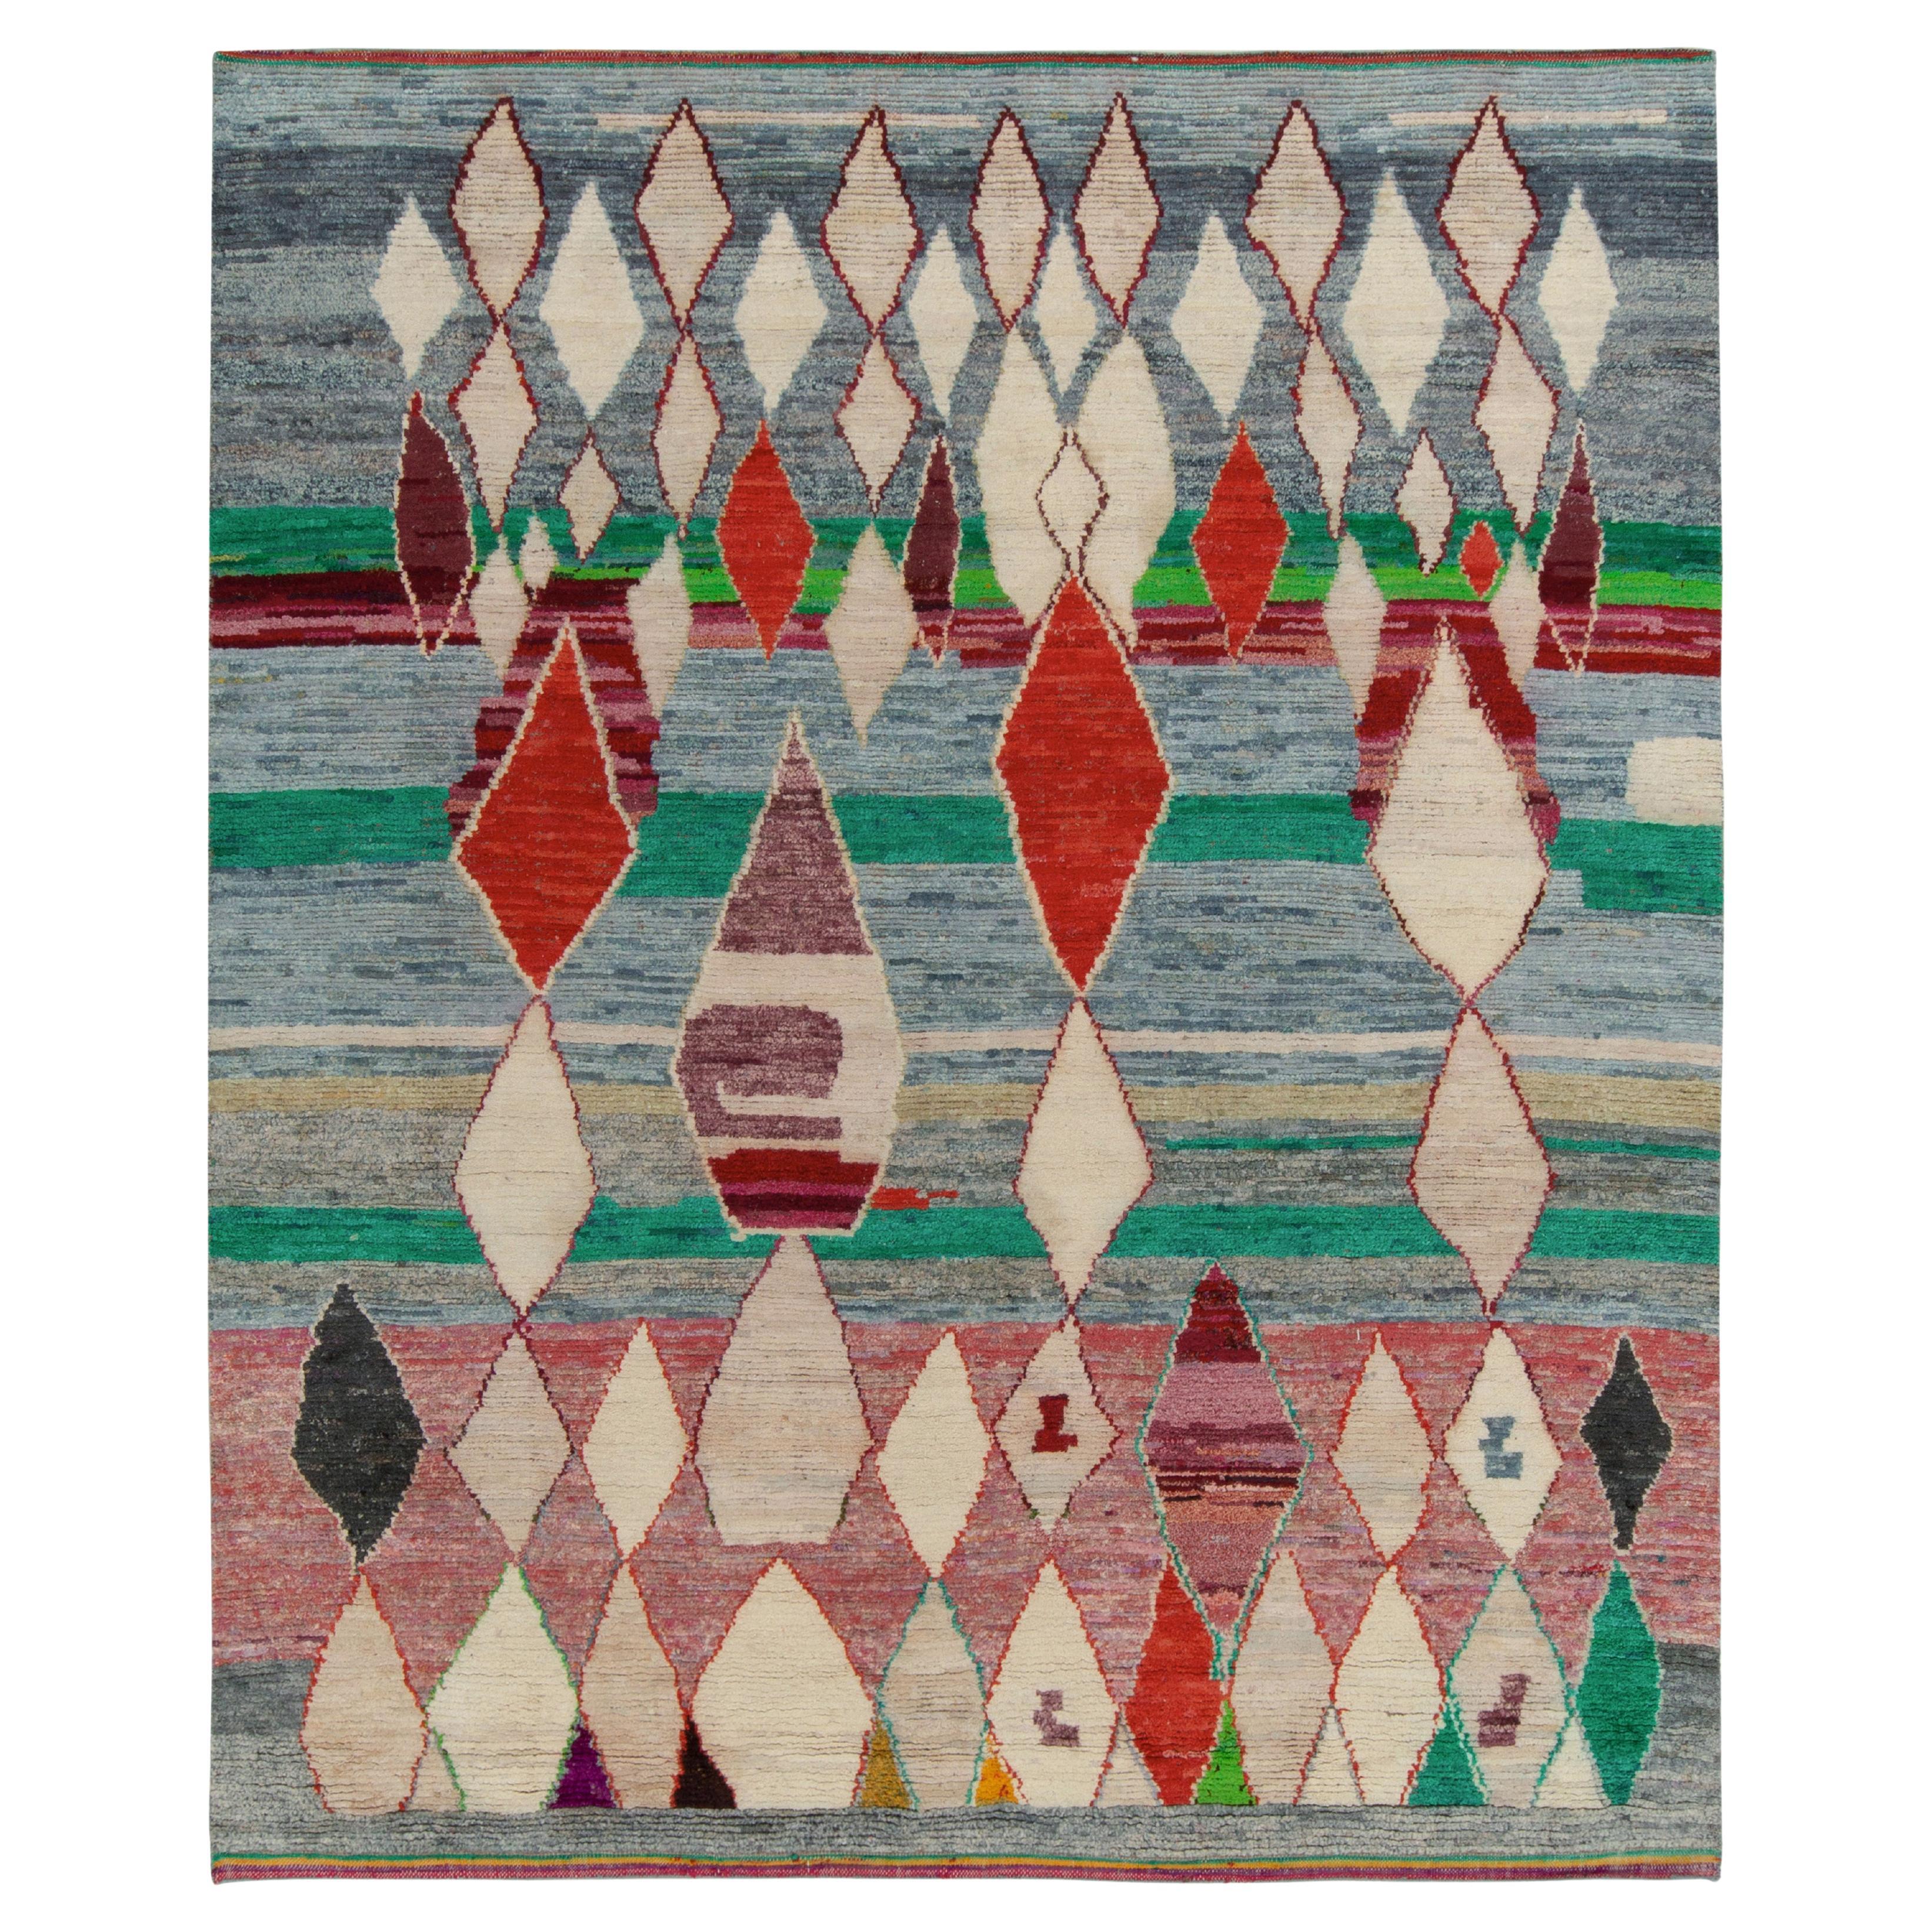 Rug & Kilim’s Moroccan Style Rug in Blue with Red & White Diamond Patterns